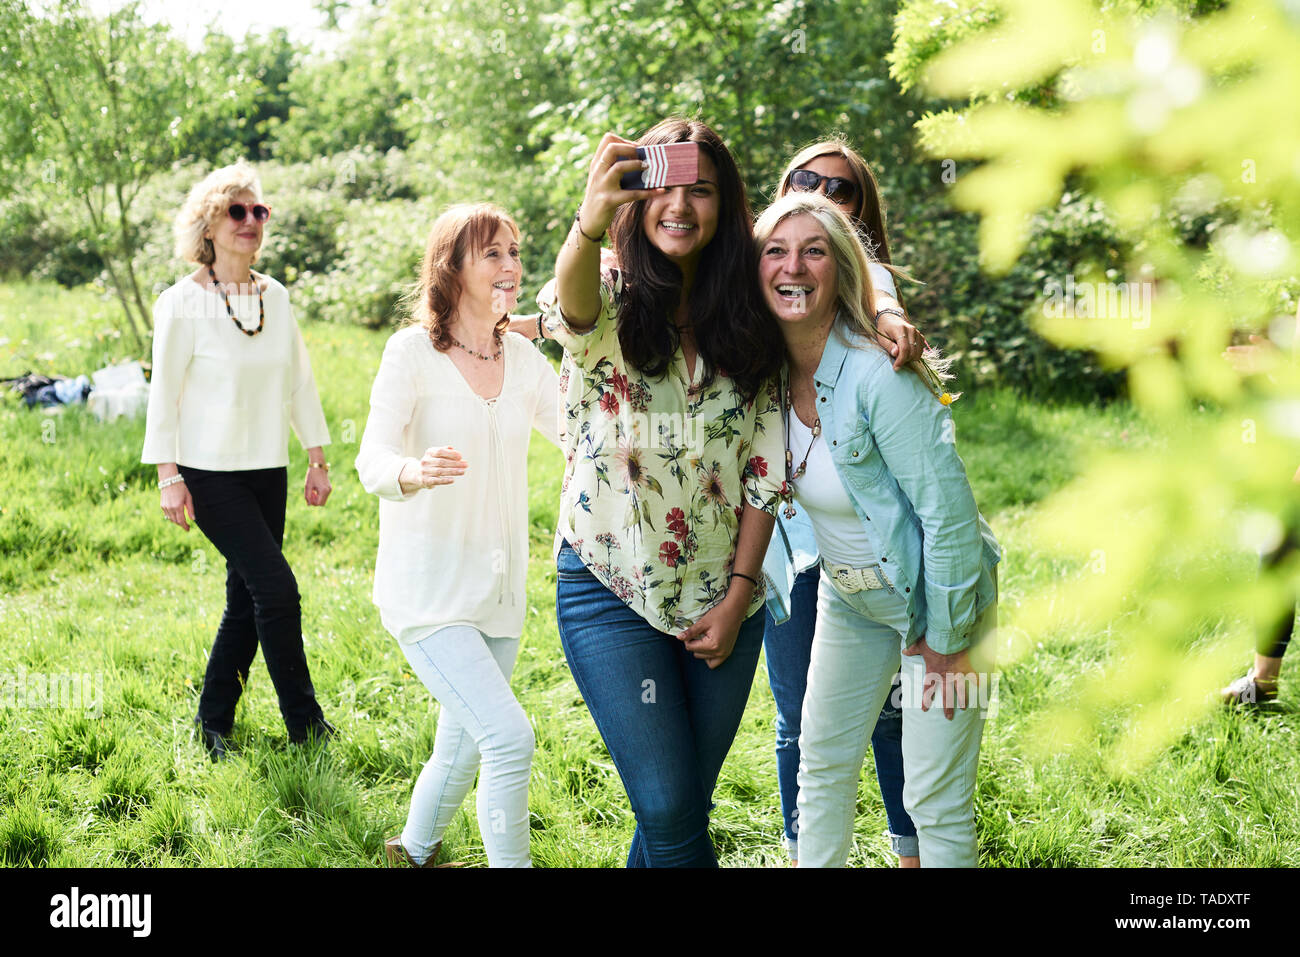 Group of happy women taking a selfie in park Stock Photo